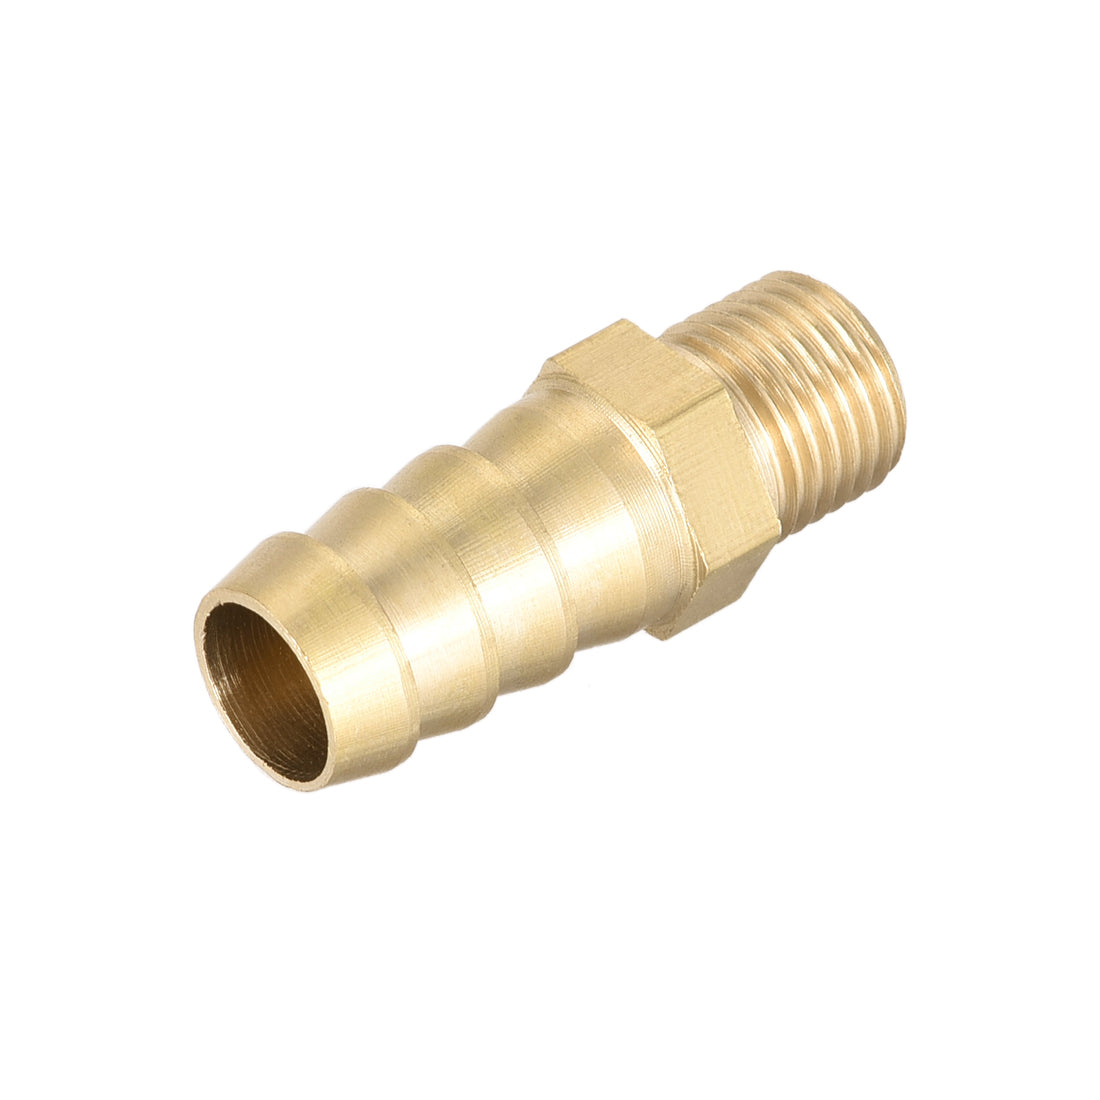 uxcell Uxcell Brass Fitting Connector Metric M10-1 Male to Barb Fit Hose ID 10mm 2pcs